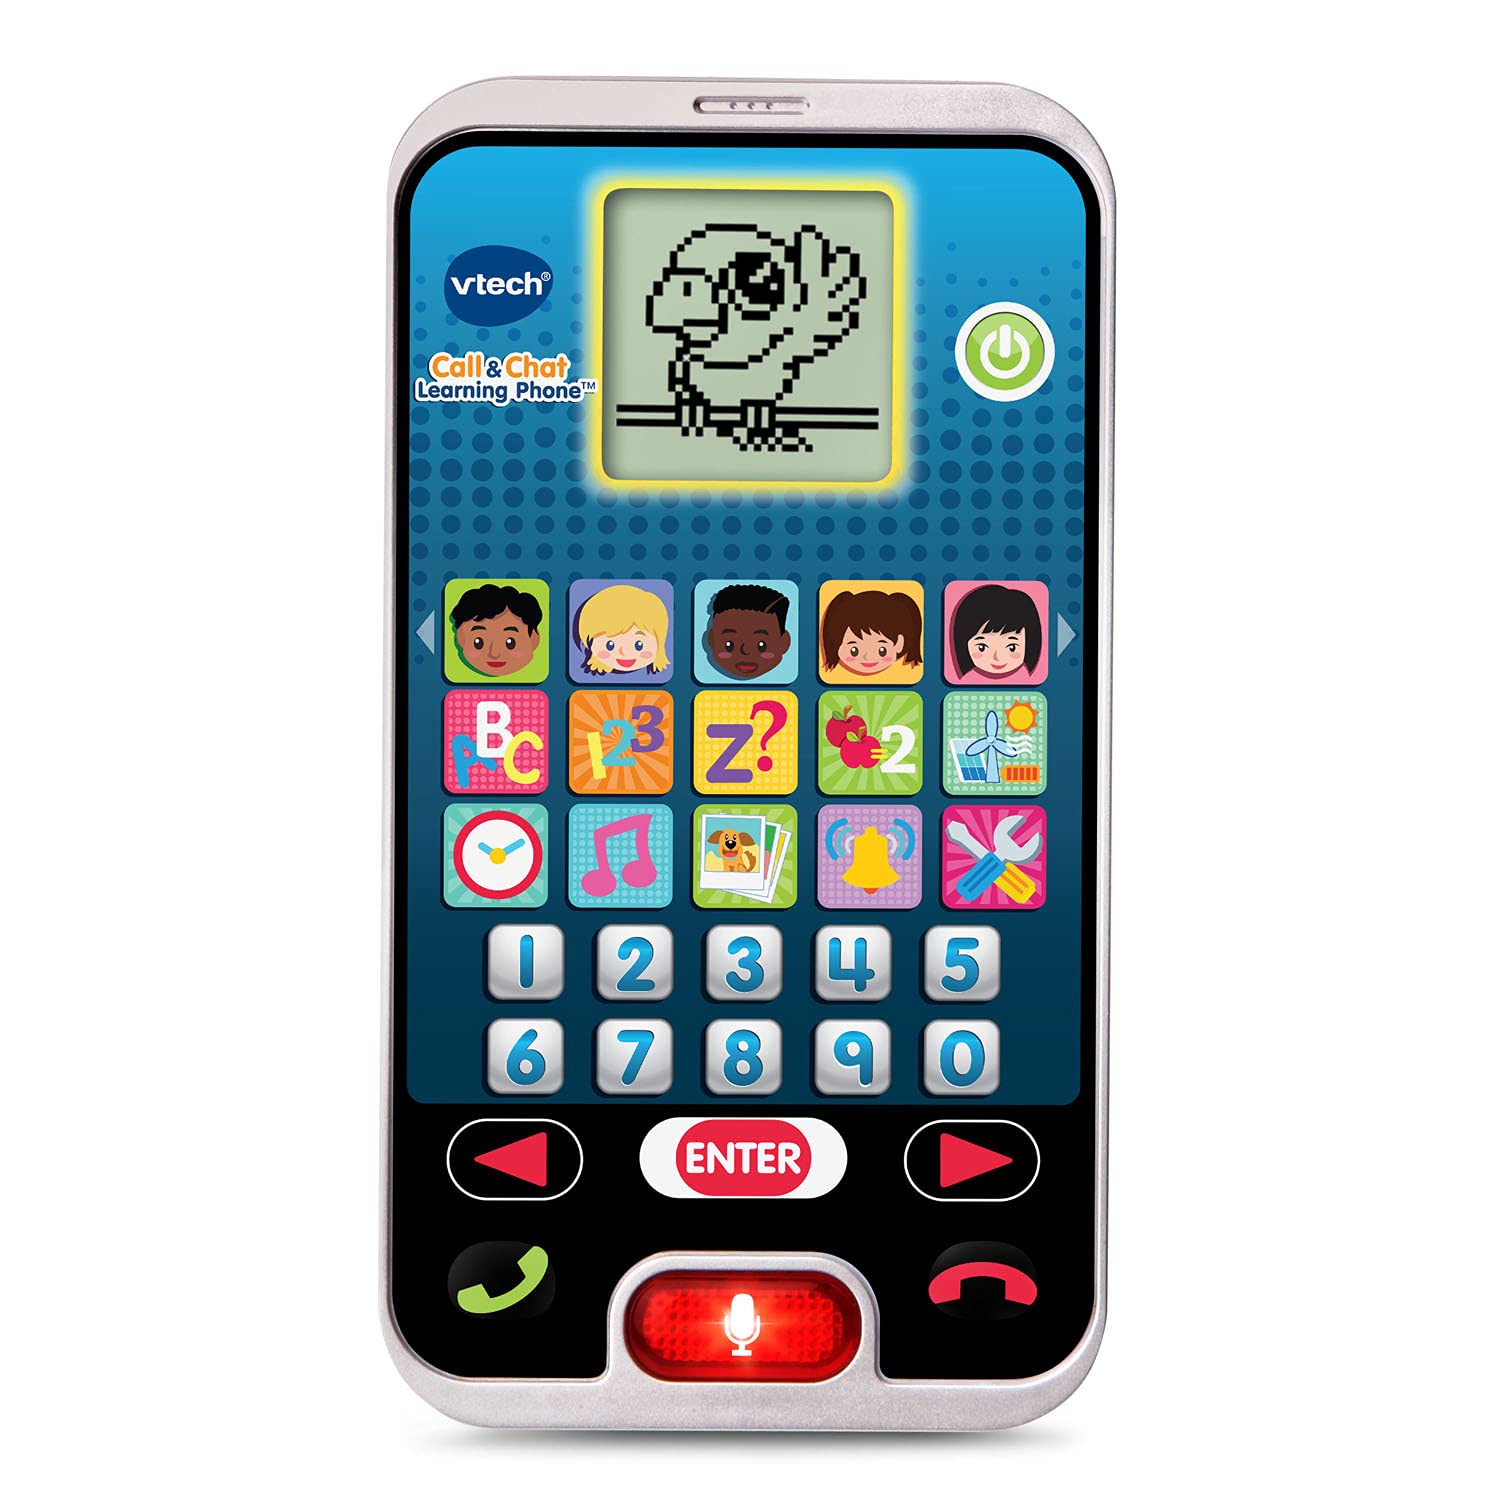 VTech Call and Chat Learning Phone, Black